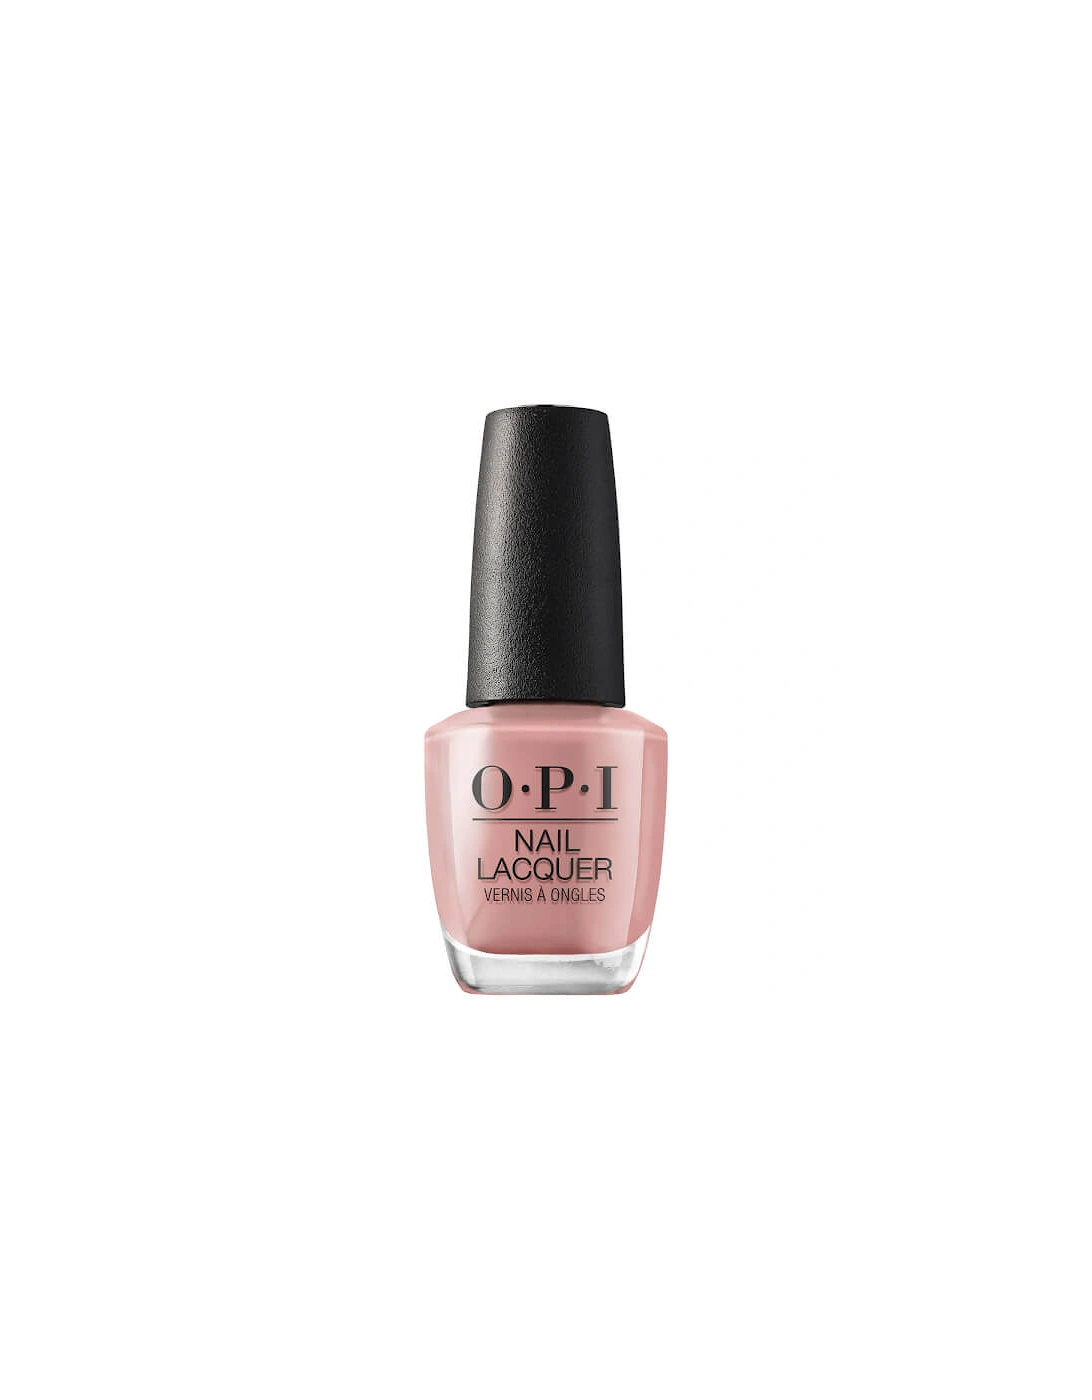 Nail Lacquer - Fast-Drying Nail Polish - Barefoot in Barcelona 15ml - OPI, 2 of 1